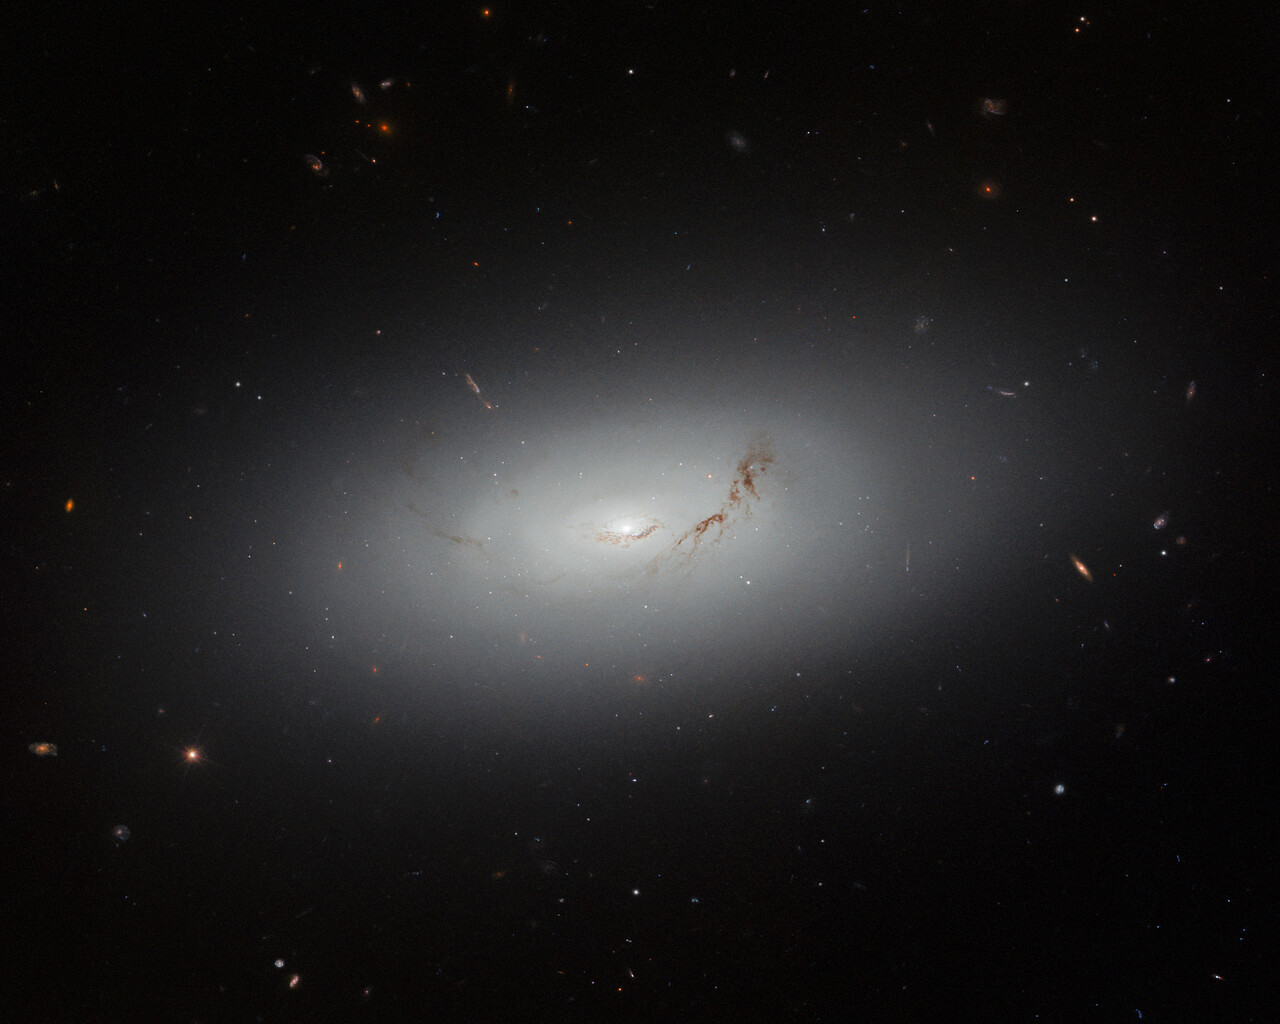 Hubble spots large elliptical galaxy about 73 million light-years from Earth